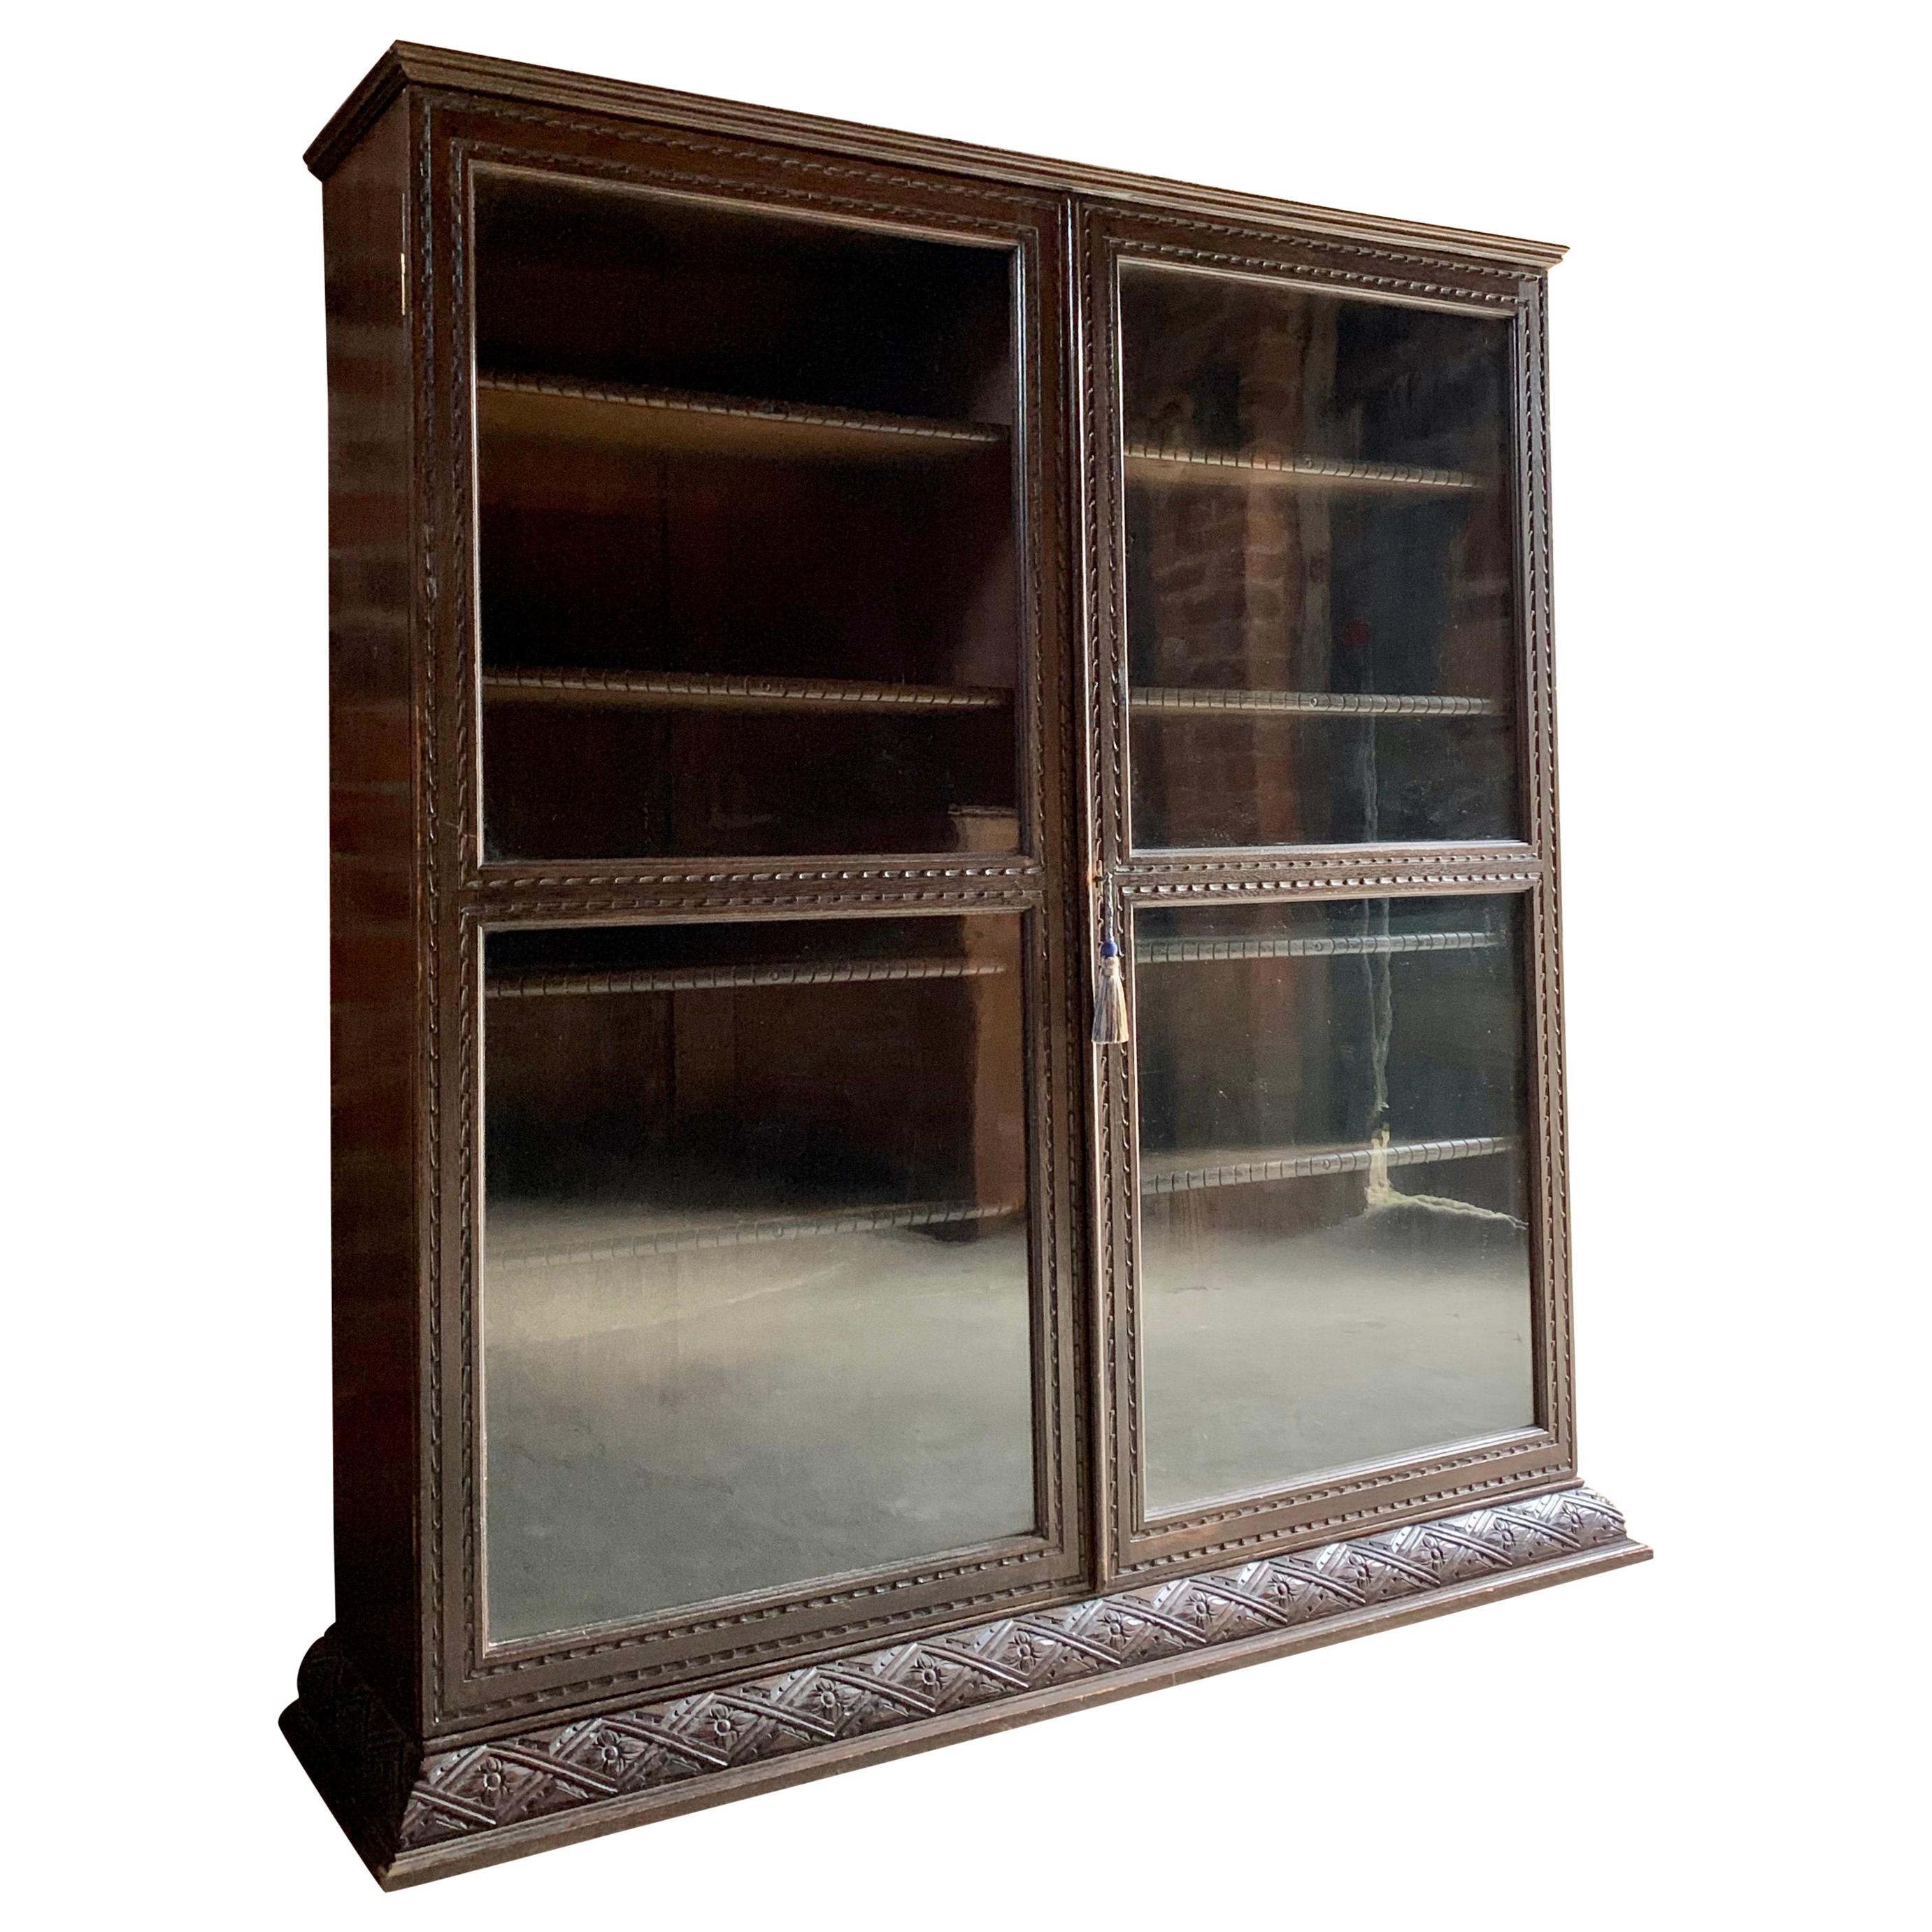 Magnificent Antique Oak Glazed Bookcase Carved Decoration, Early 20th Century